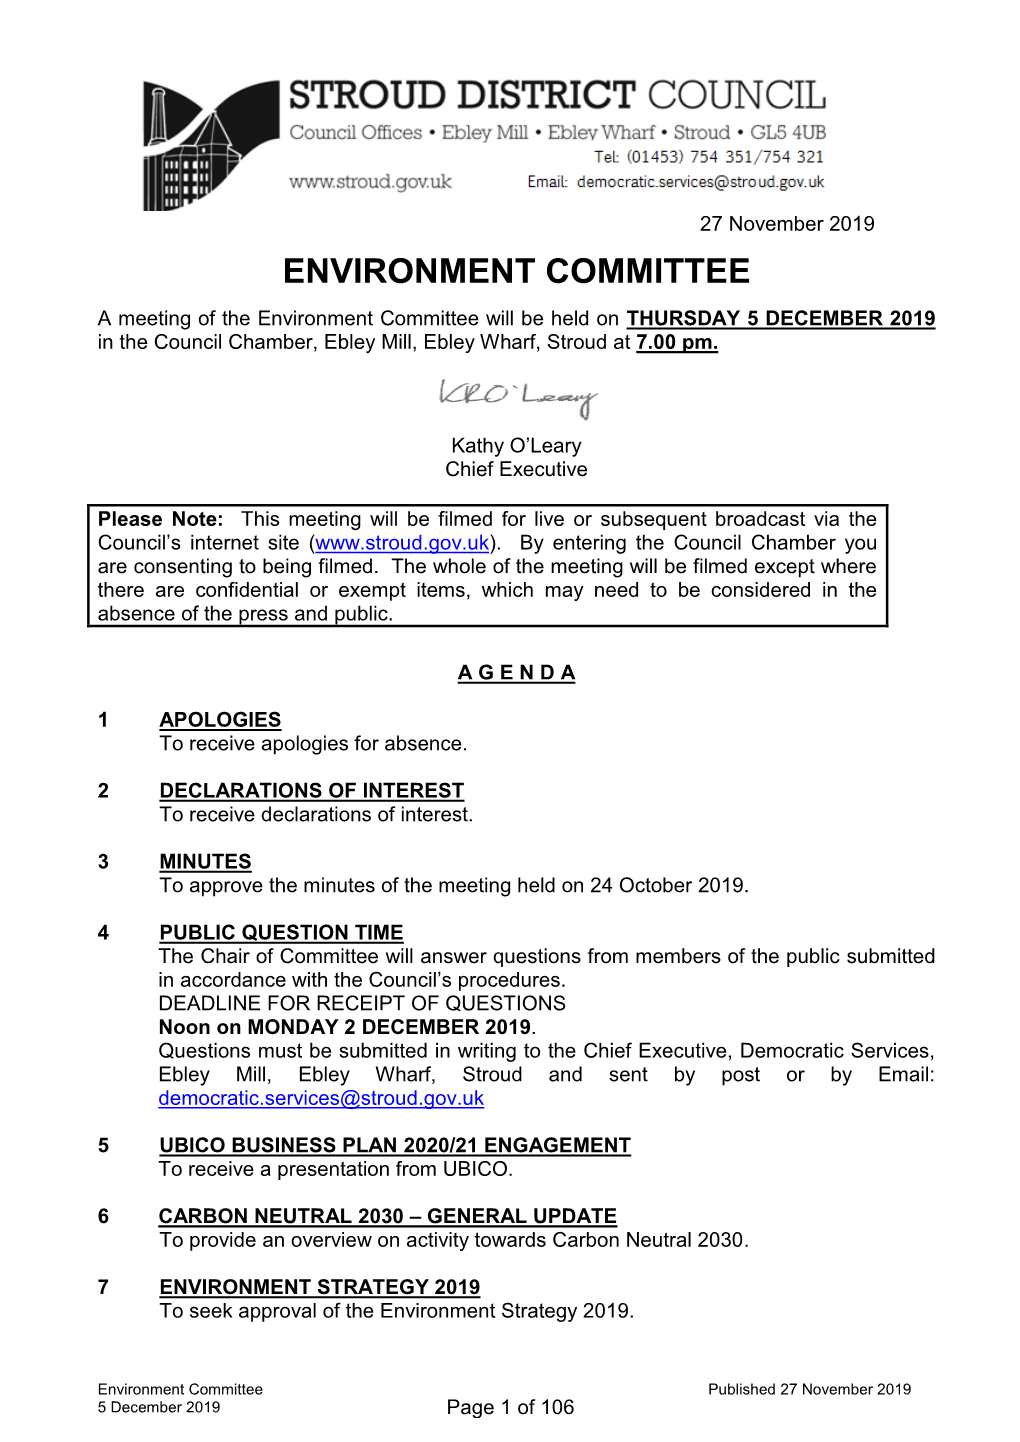 Environment Committee